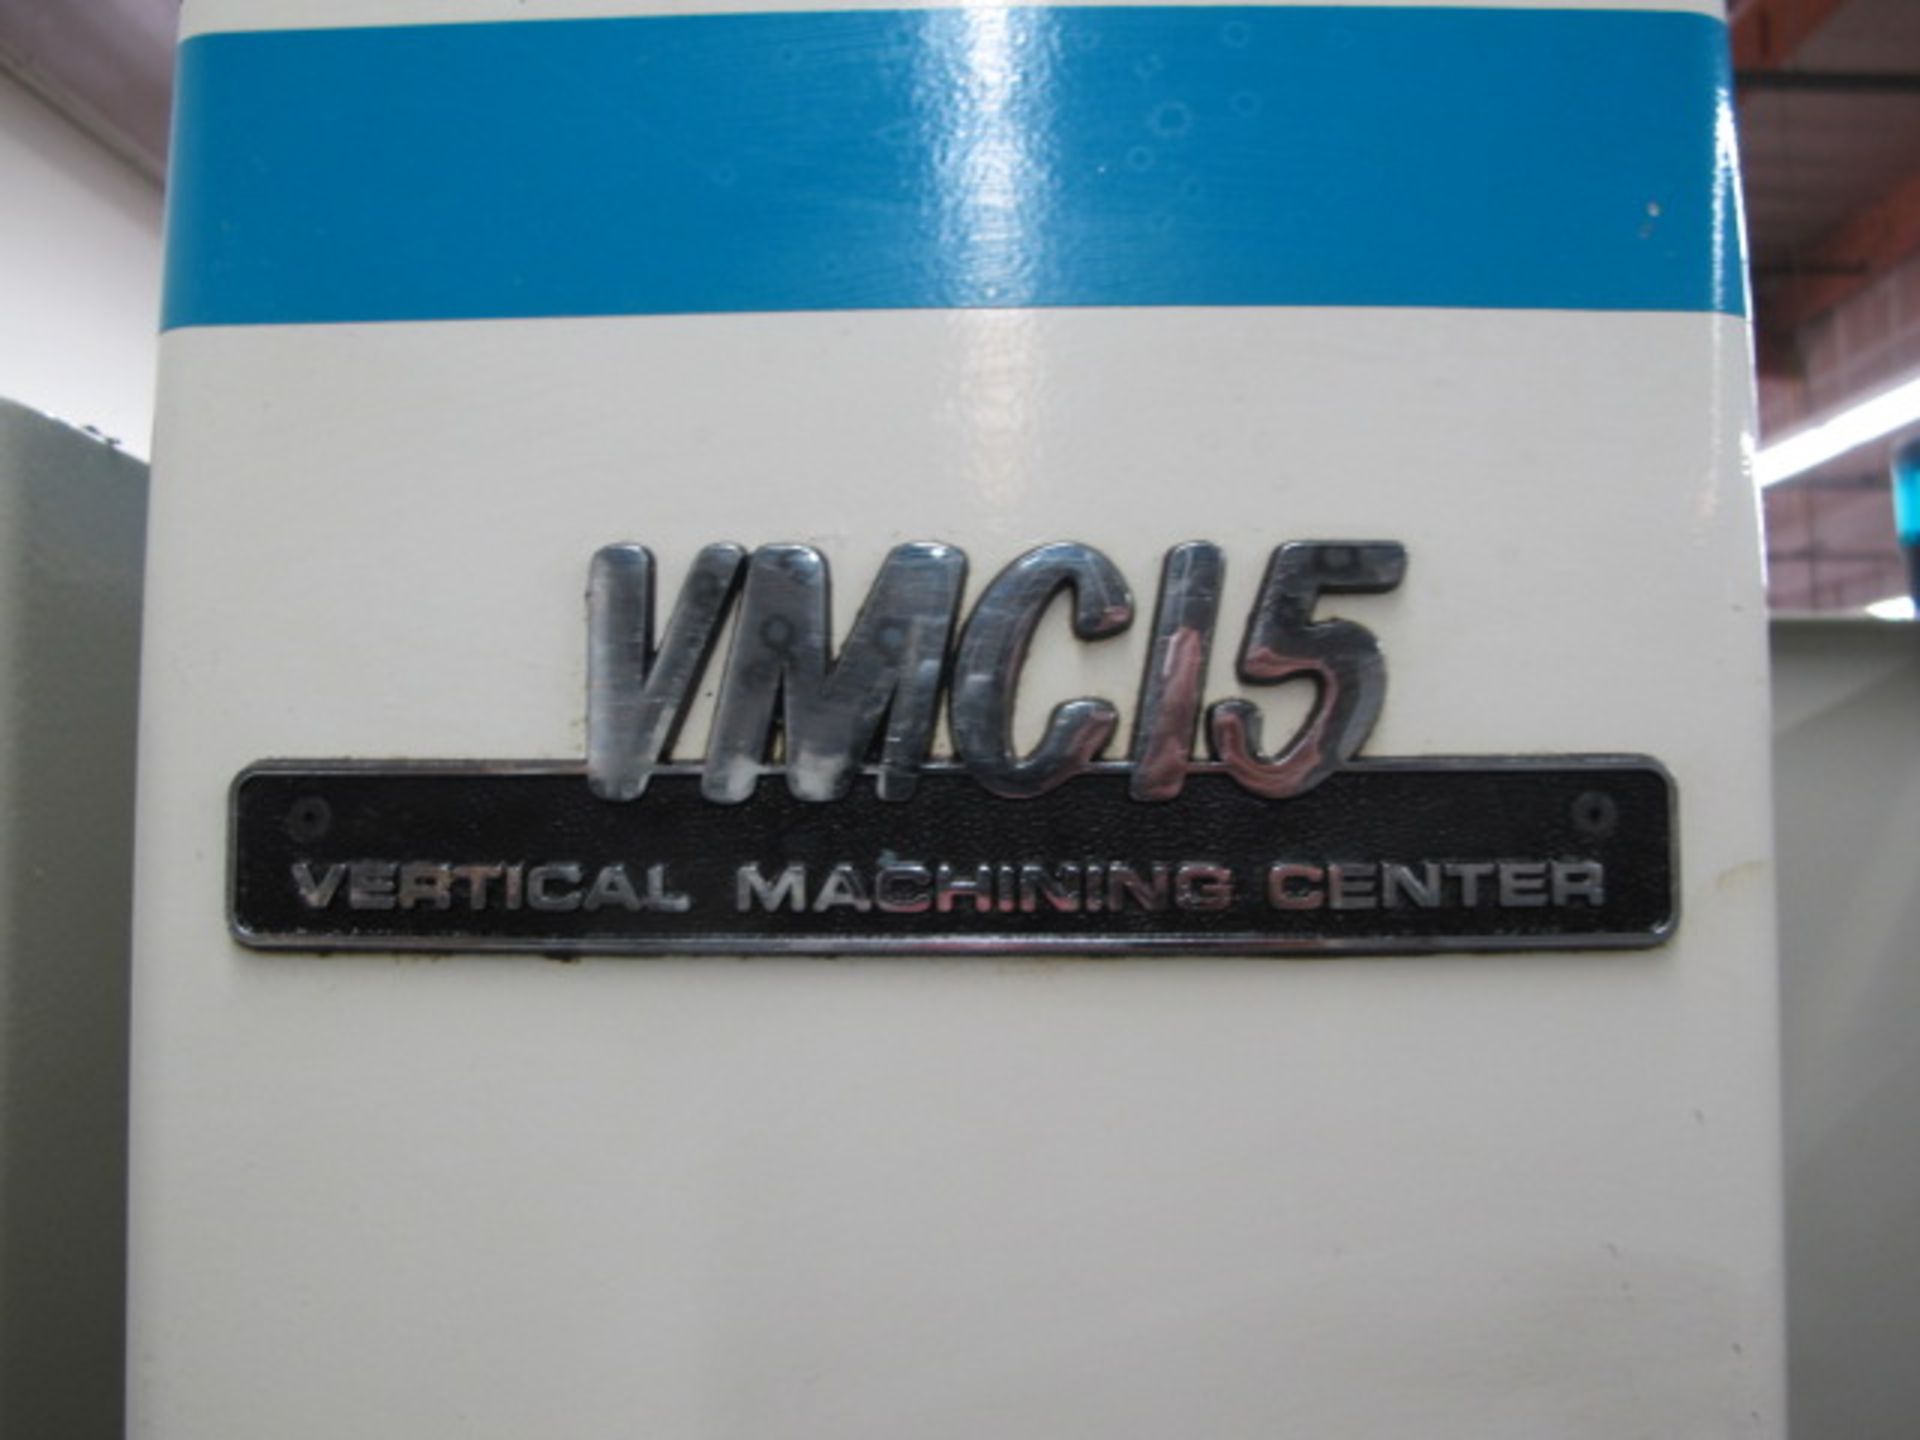 1995 Fadal VMC15RT mdl. 914-15 4-Axis CNC Vertical Machining Center s/n 9508667 w/ Fadal CNC88 - Image 4 of 12